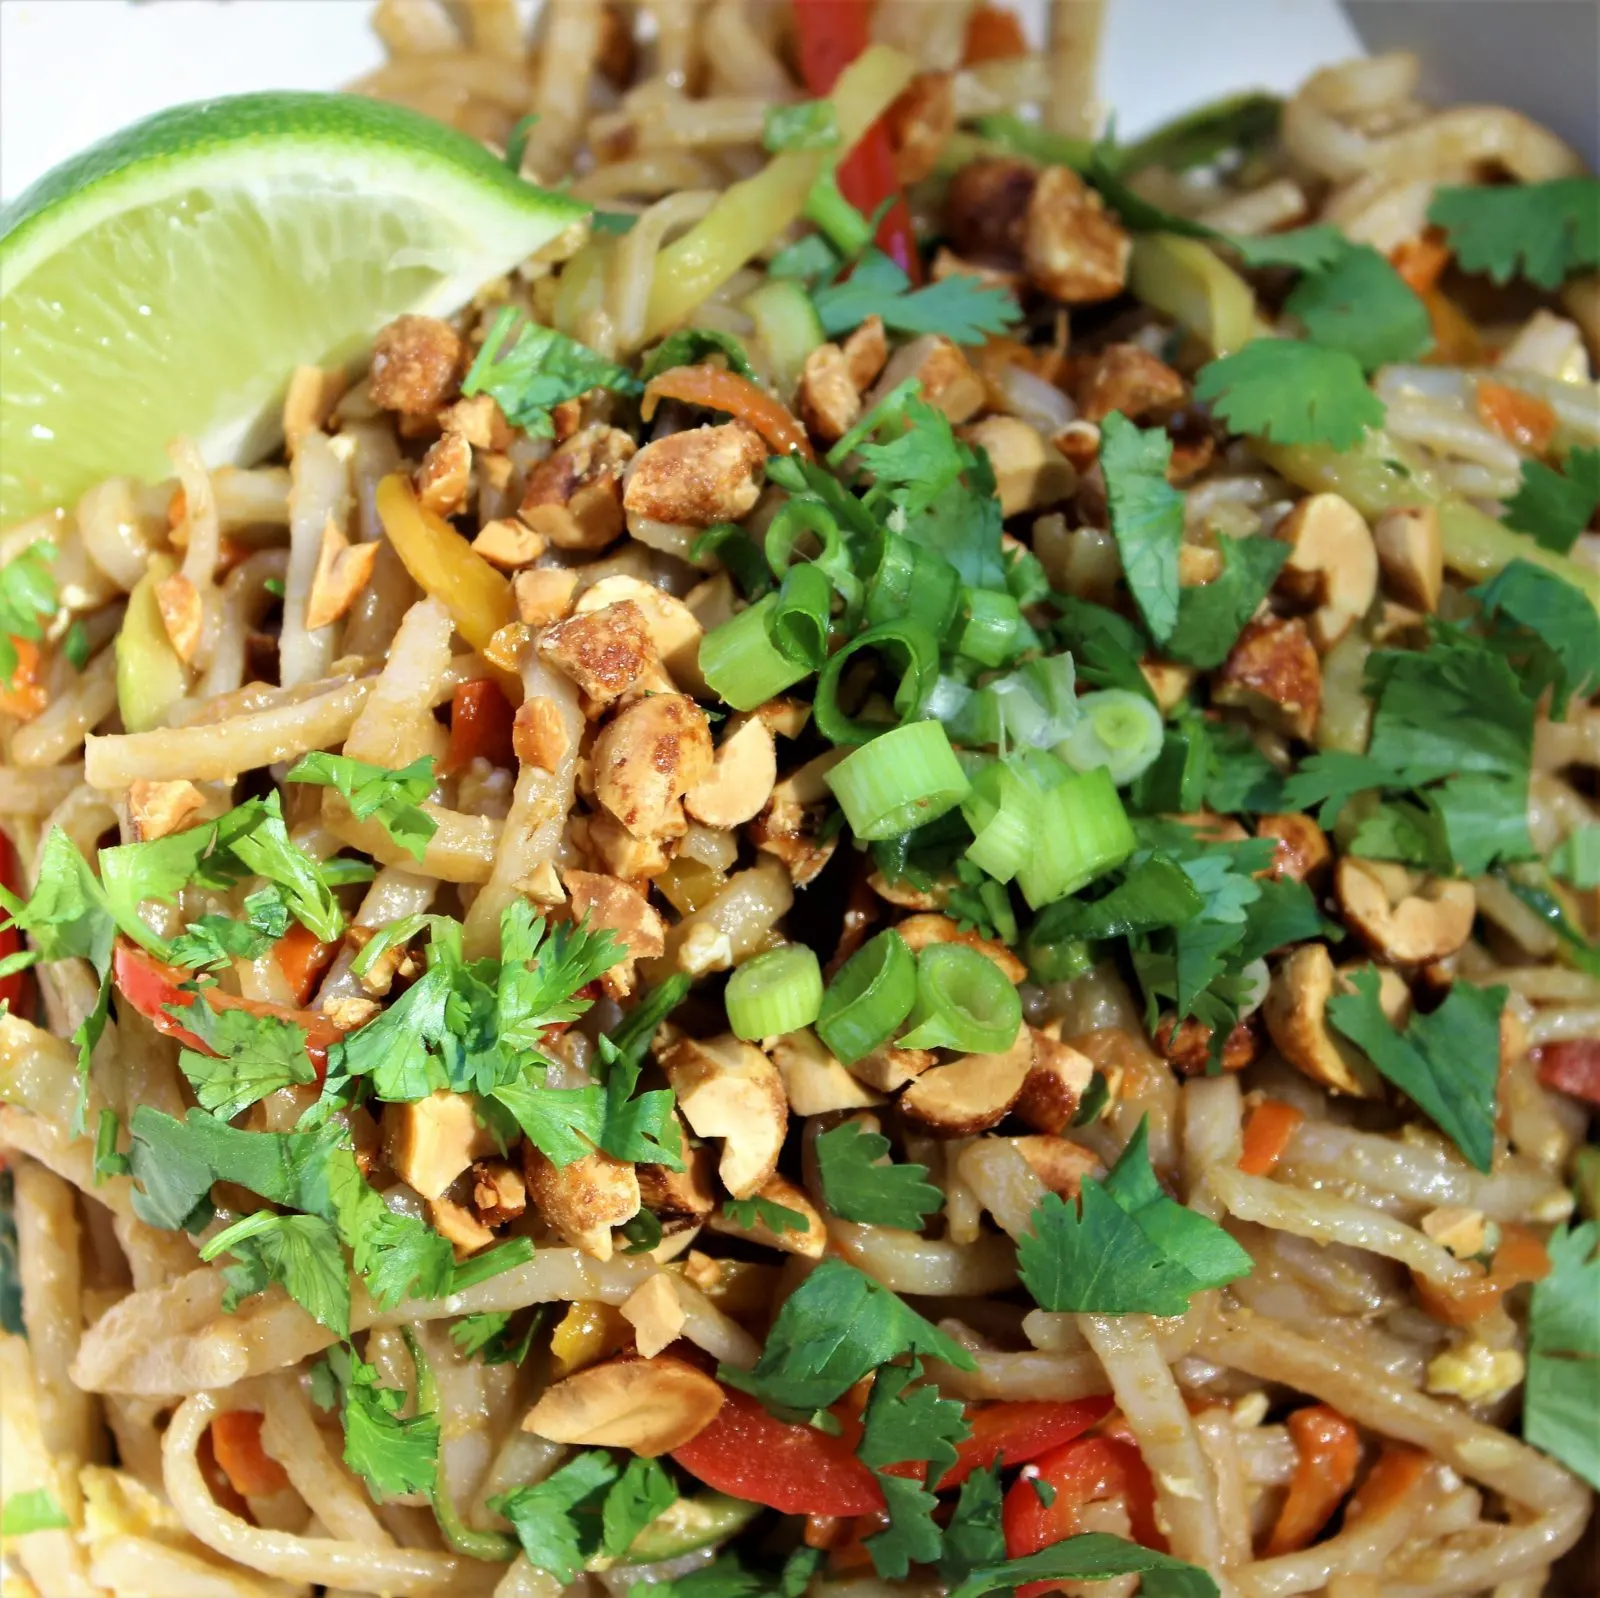 Asian Noodles with Peanut Sauce and Veggies